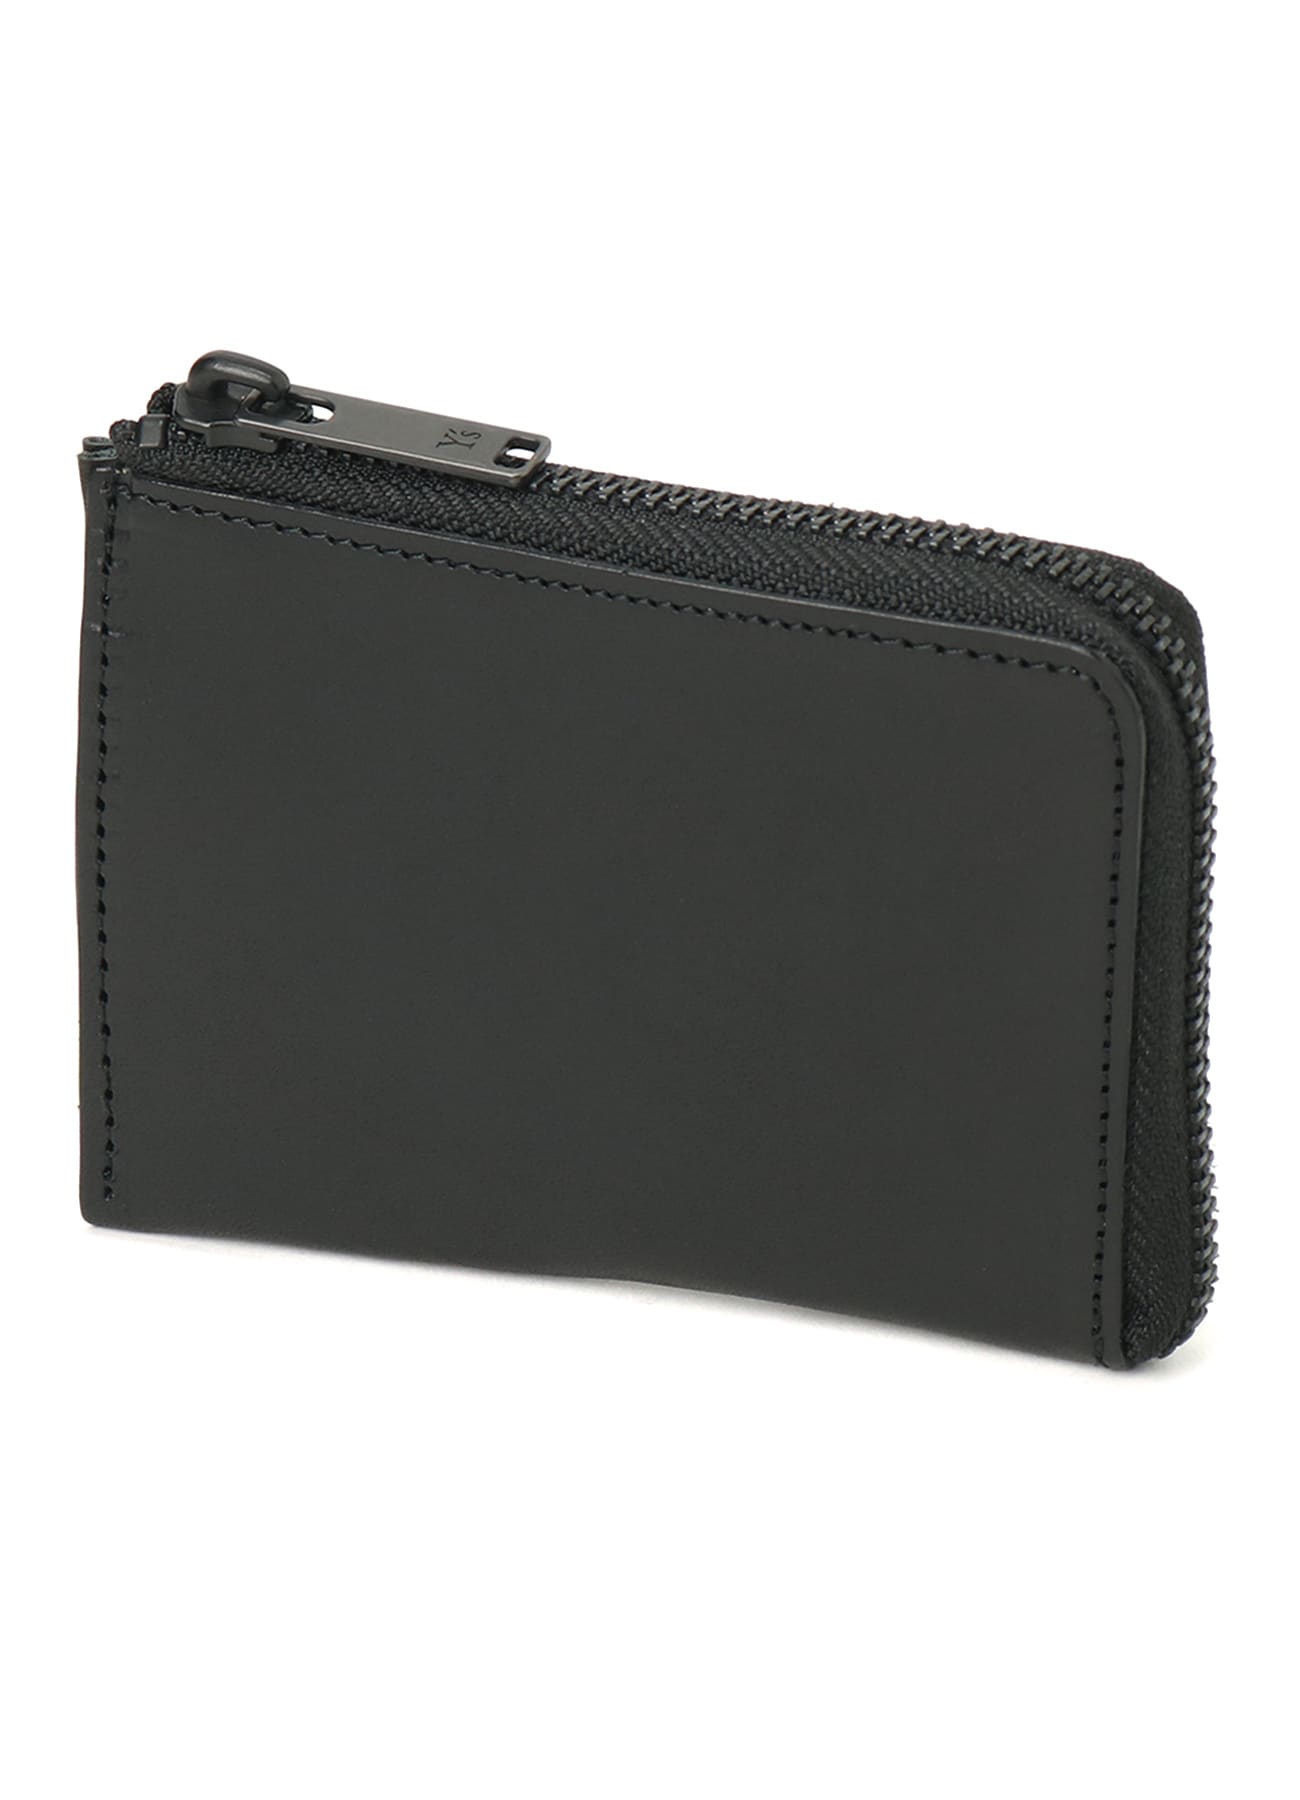 TANNED LEATHER ZIPPERED CARD CASE(S Black): Vintage 1.1｜THE SHOP